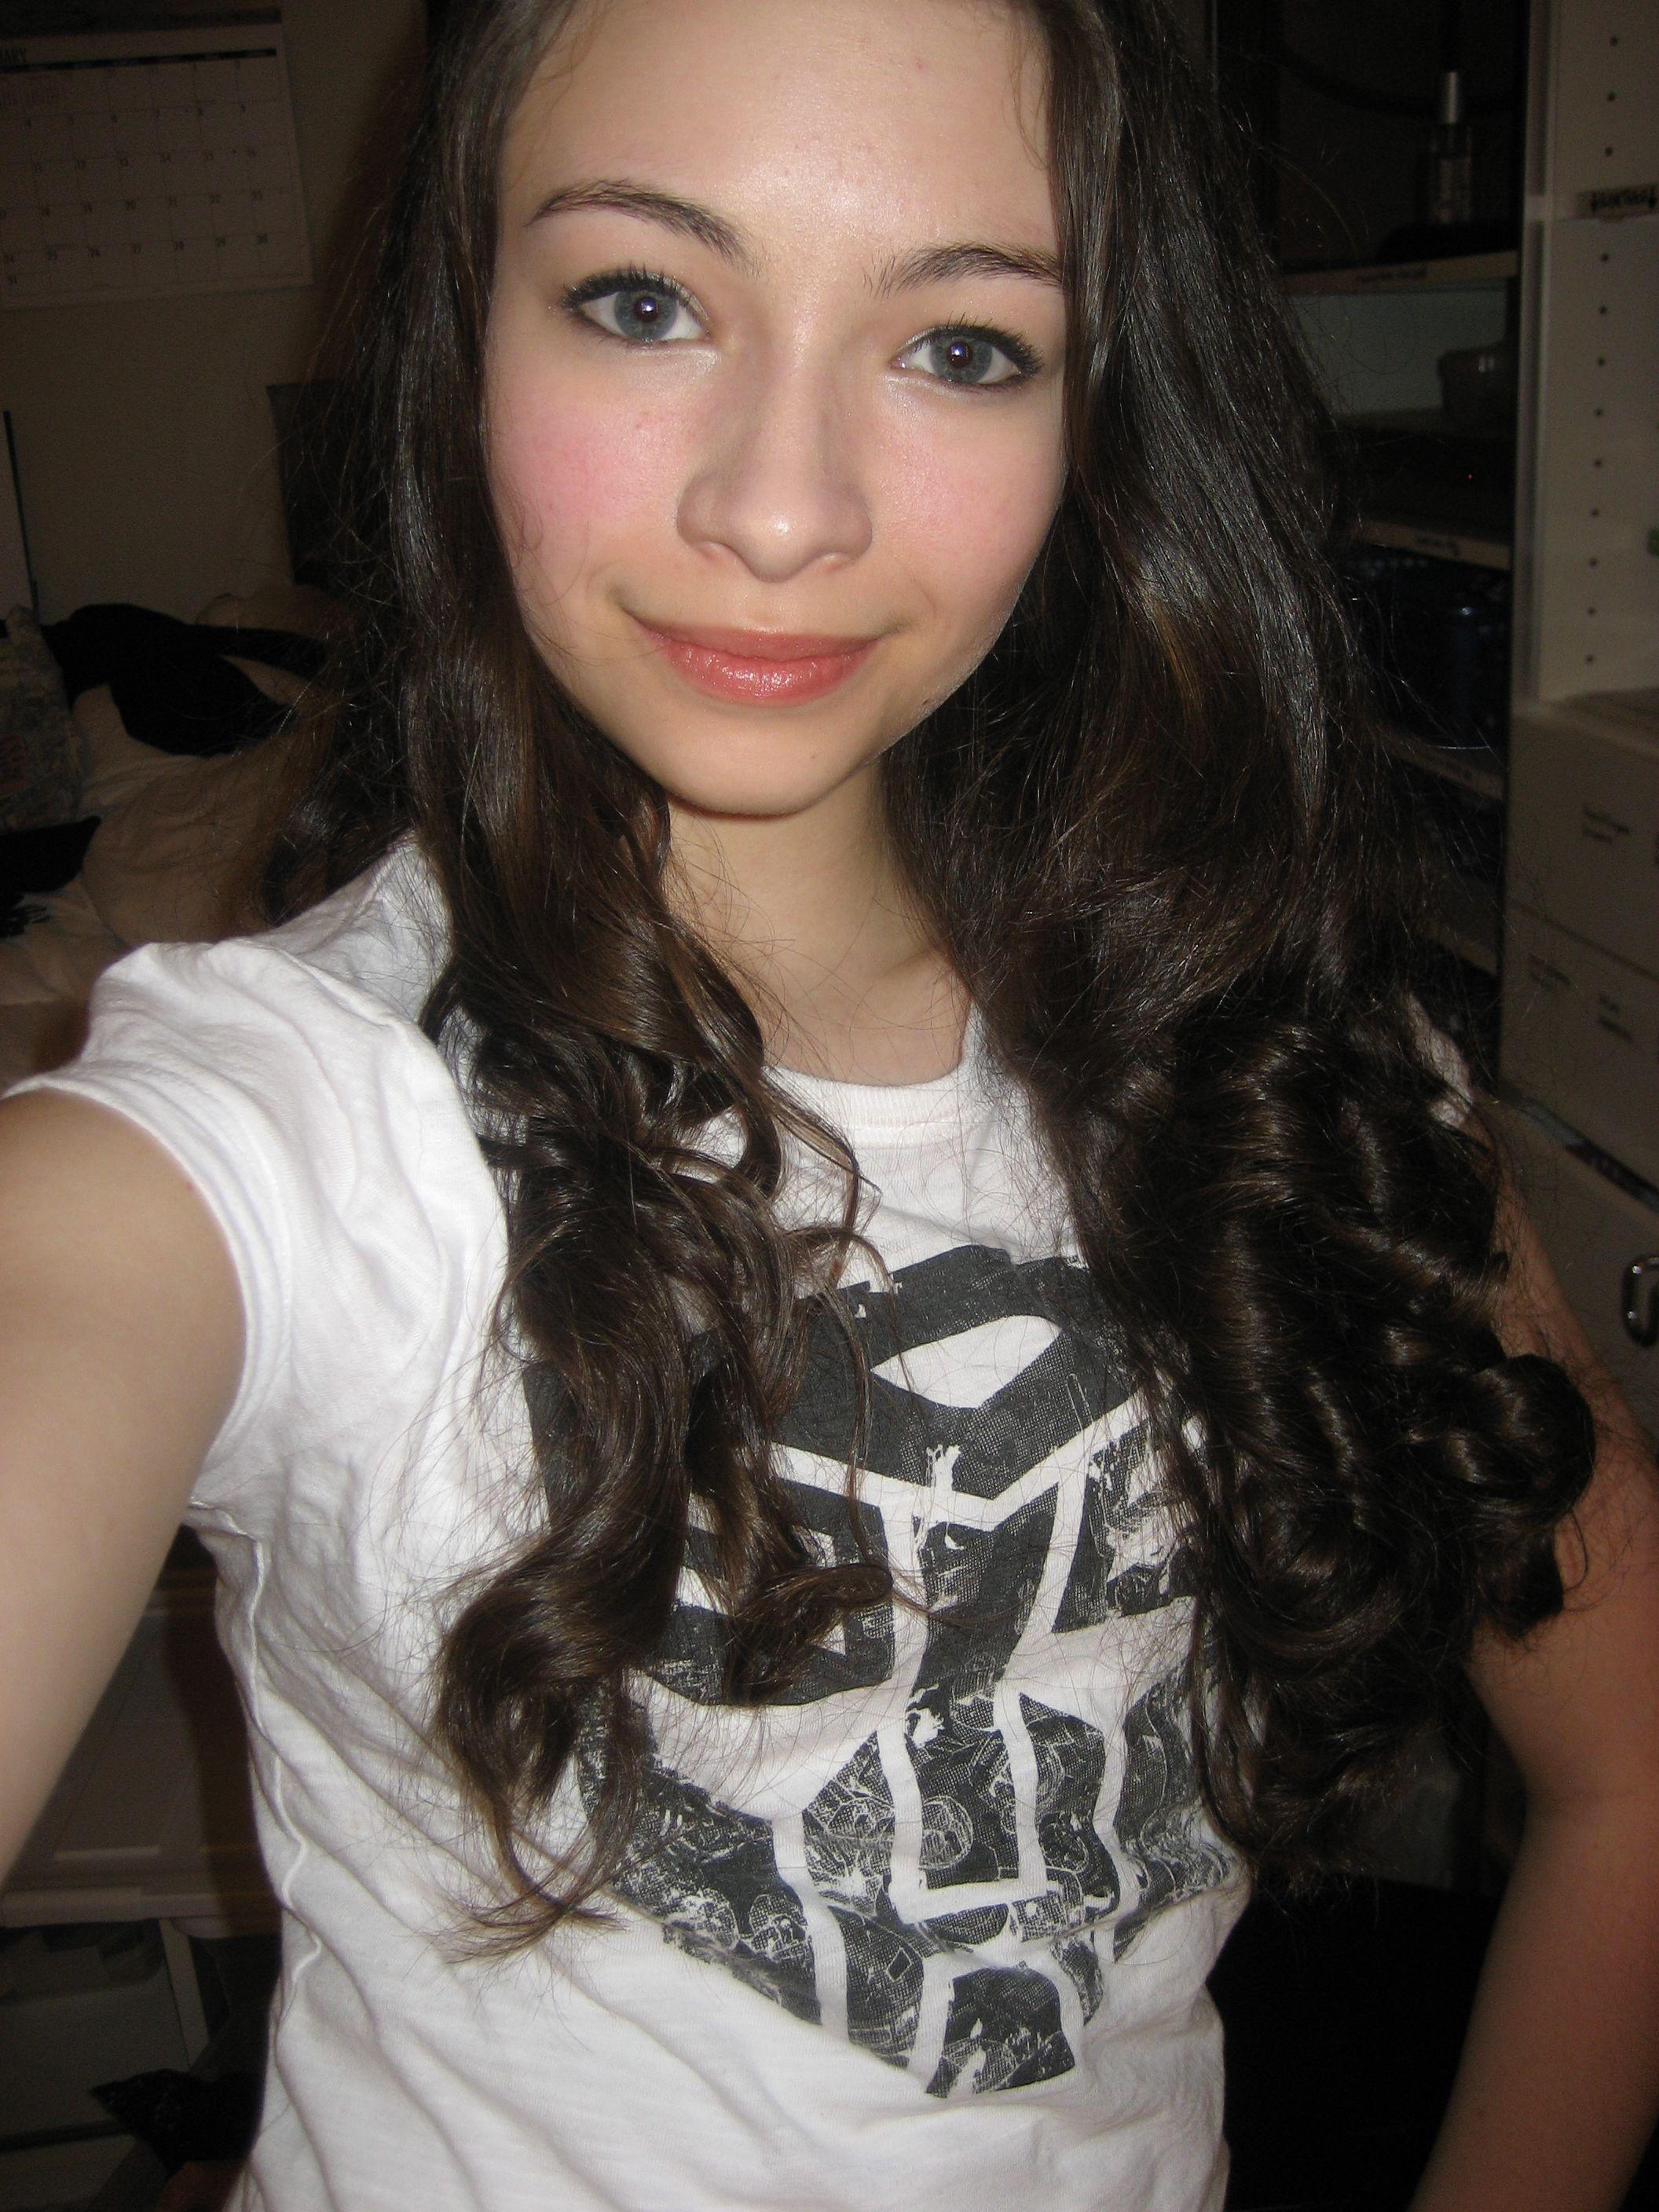 Jodelle Ferland. Peoples, and some of their styles